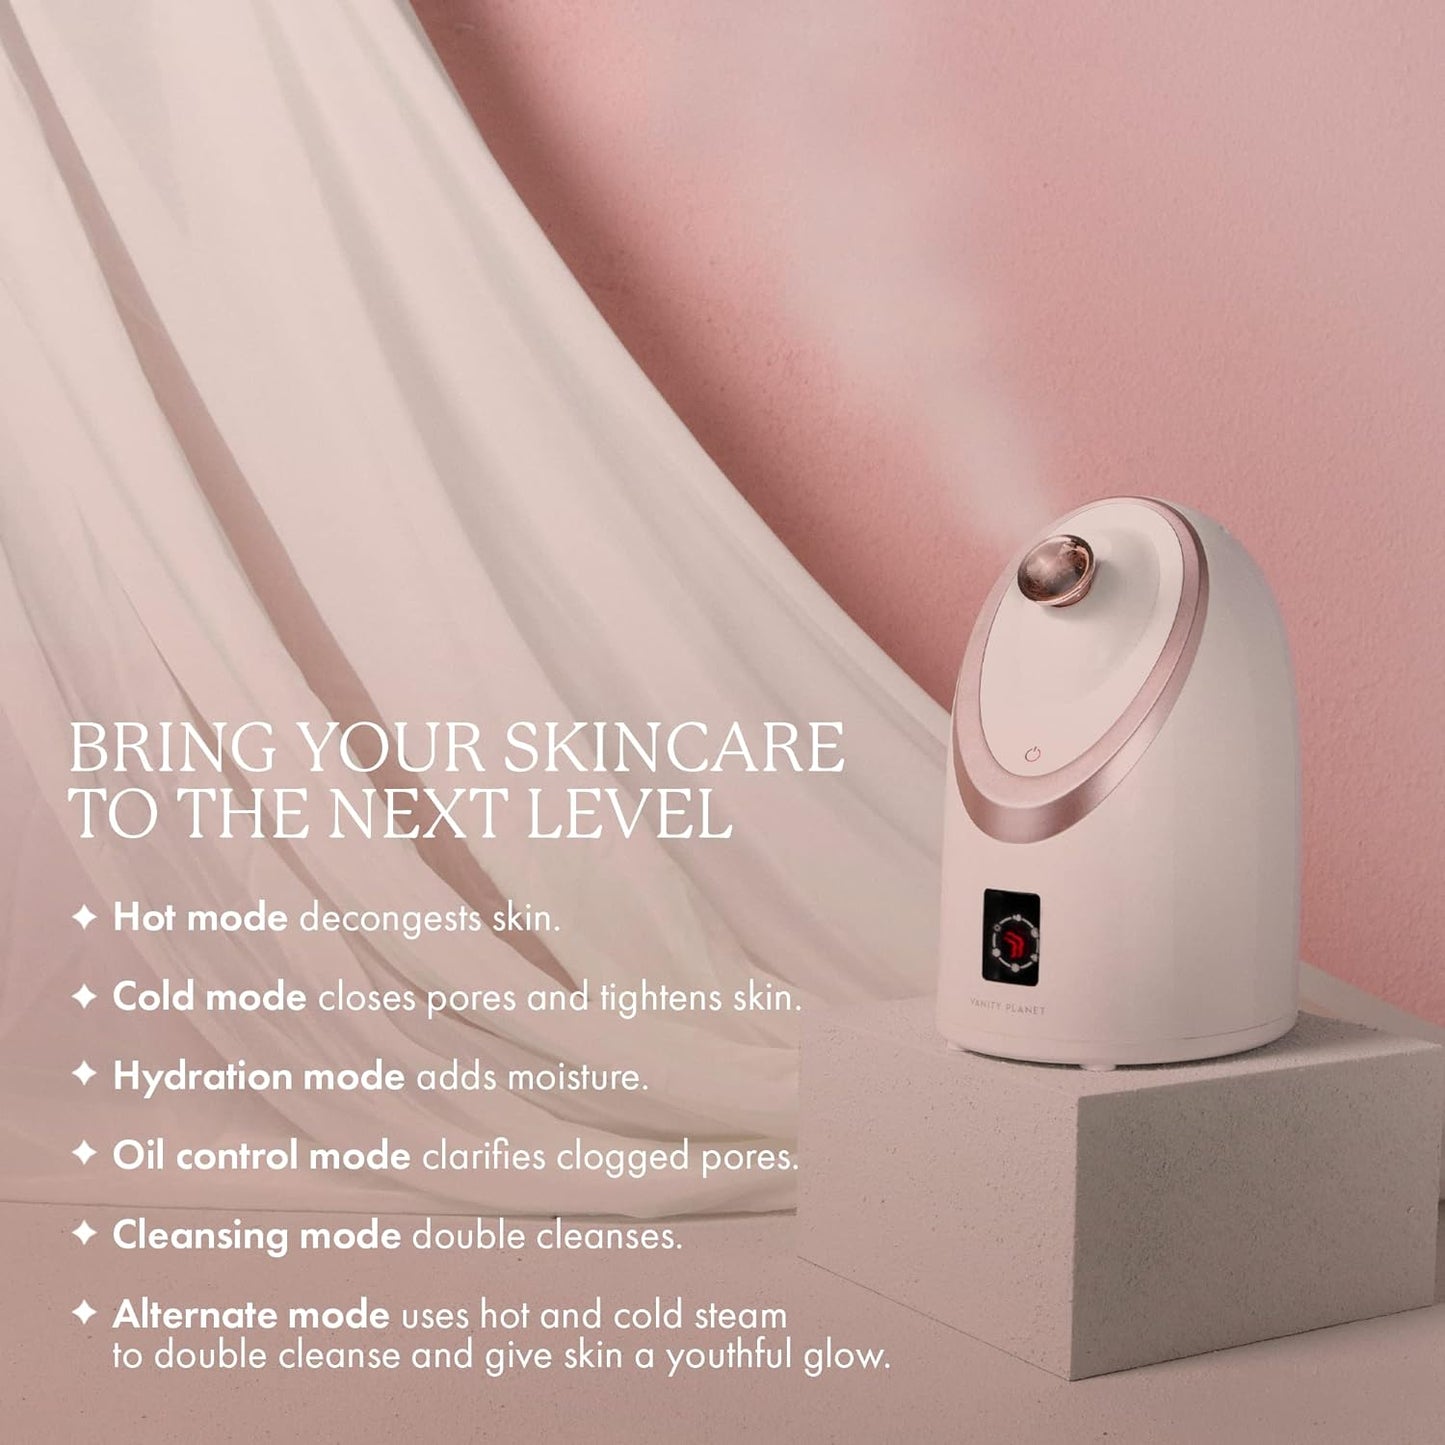 Senia Hot and Cold Facial Steamer by Vanity Planet - Detoxifying Aromatherapy Facial Steamer with Smart Steam Technology - Unclog Pores & Blackheads Cleaner Detoxifies, Cleanses & Moisturizes Skin